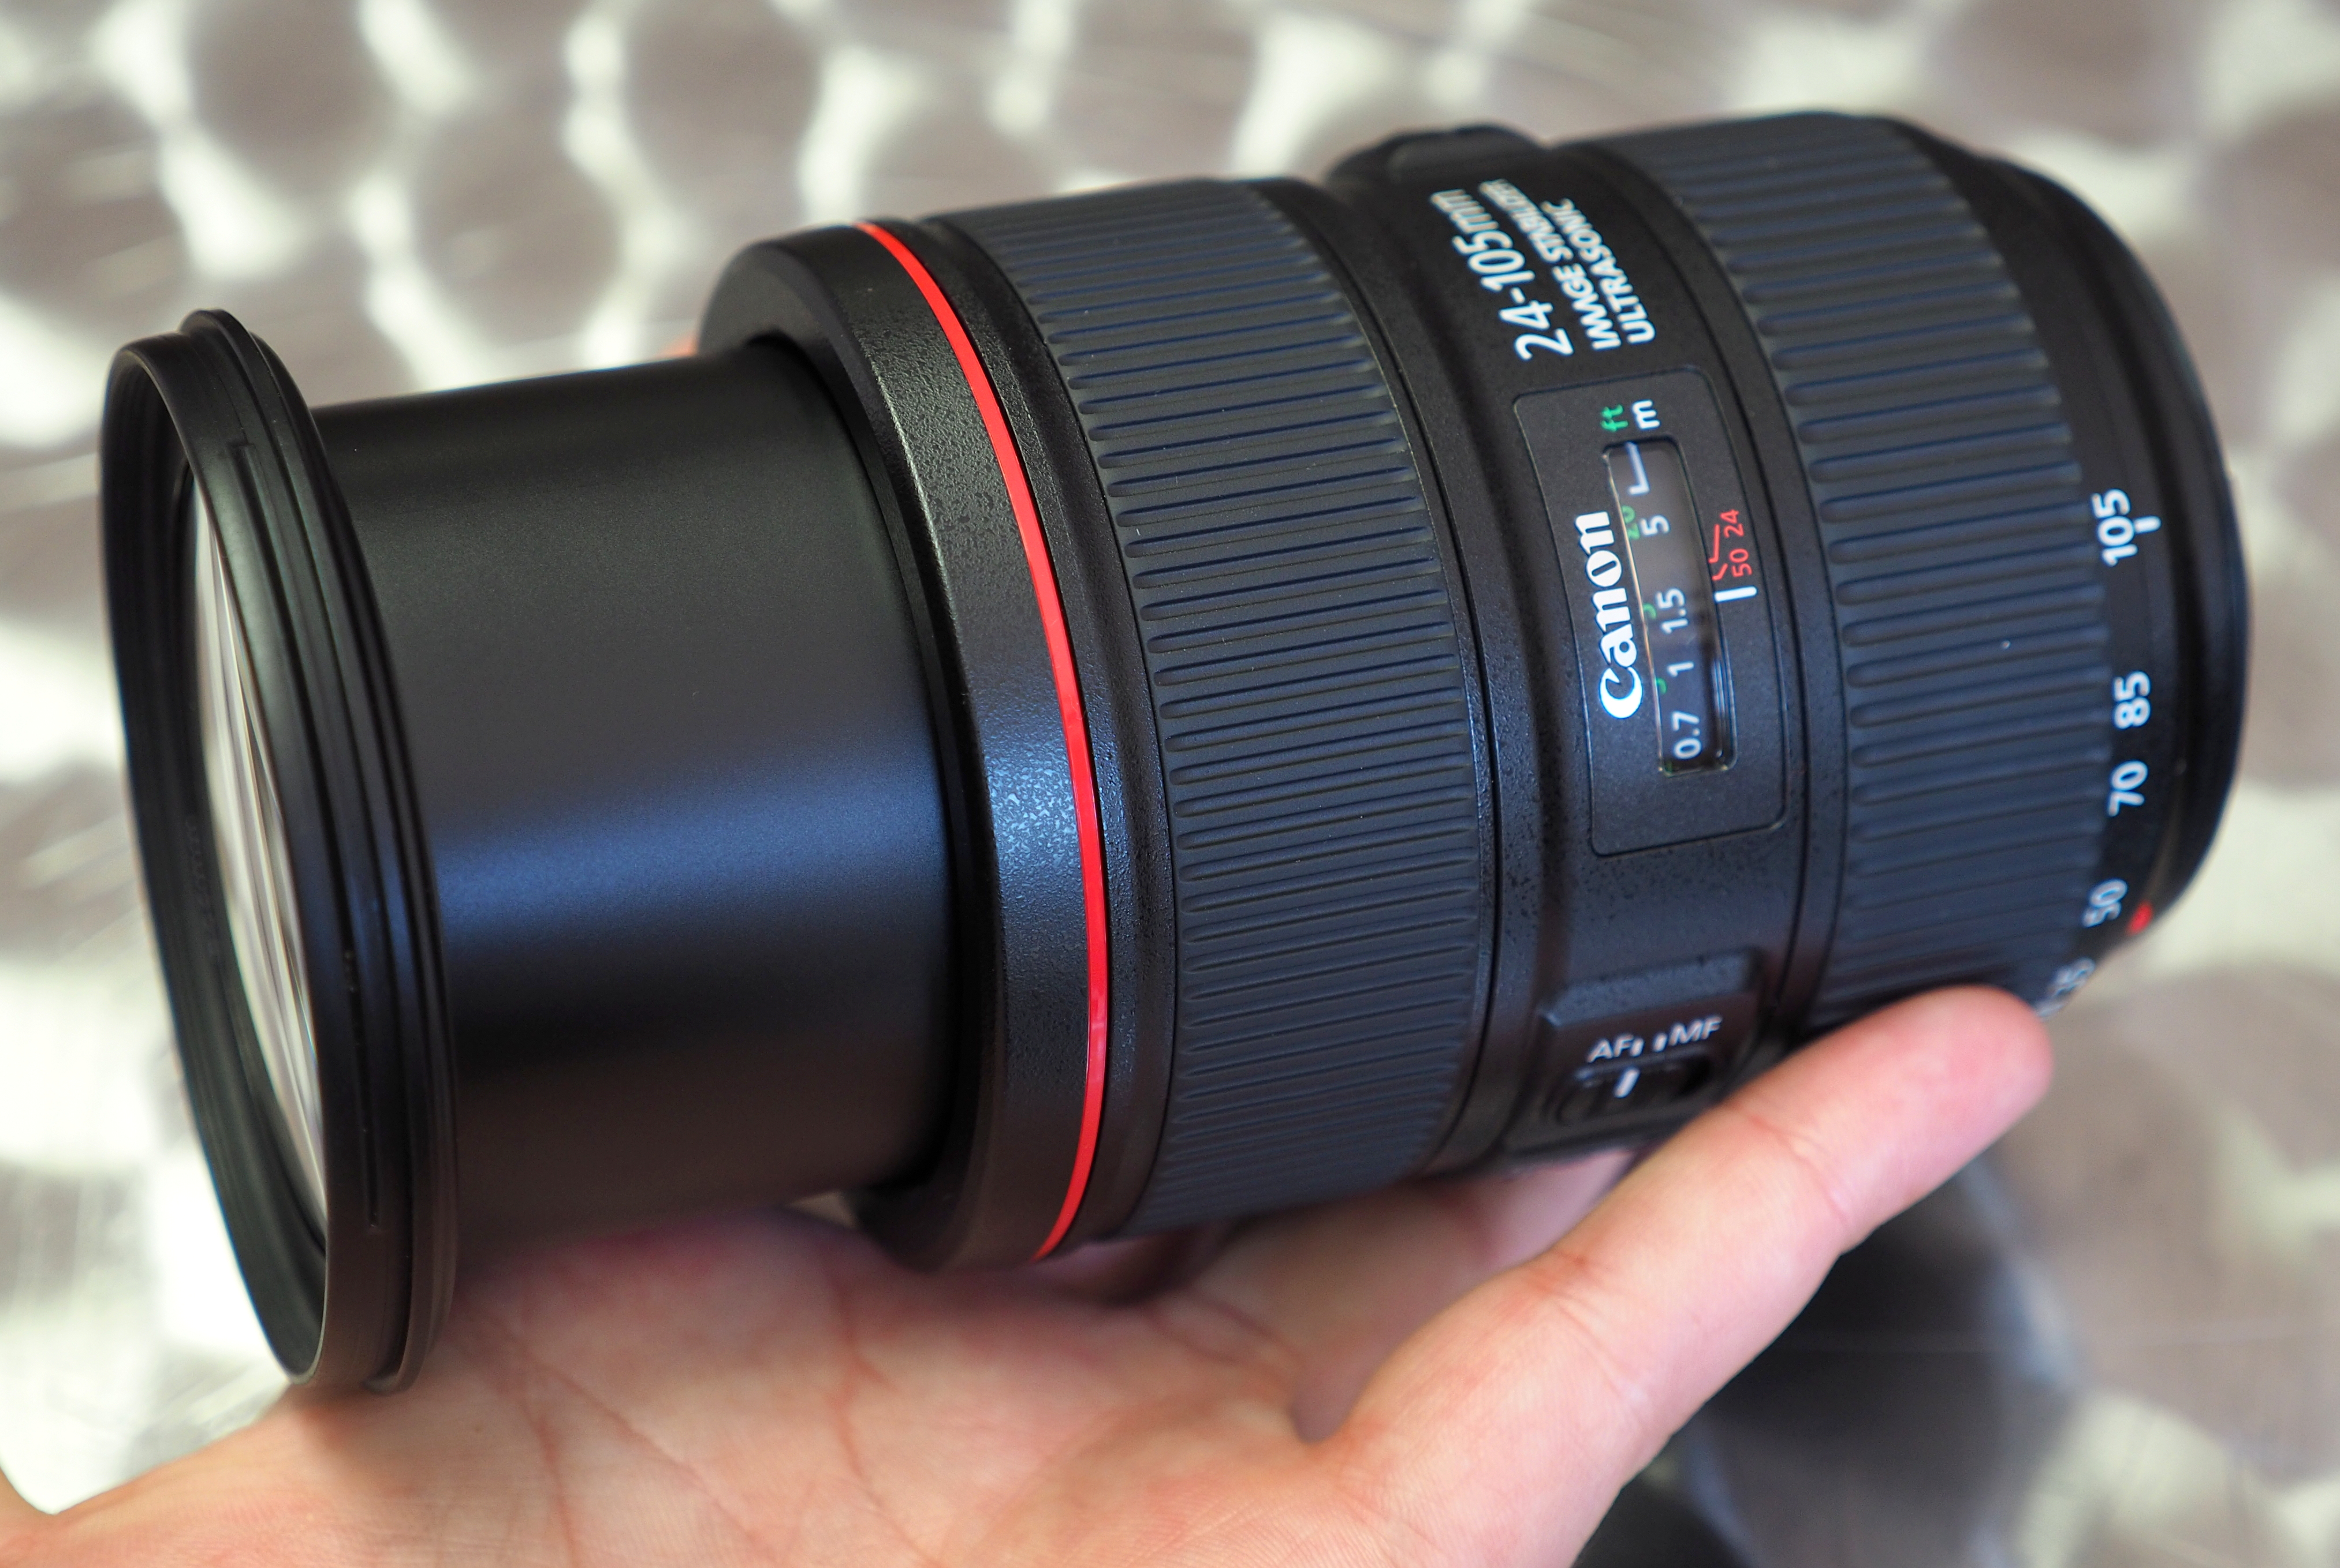 Canon EF 24-105mm f/4 IS II USM Lens Review